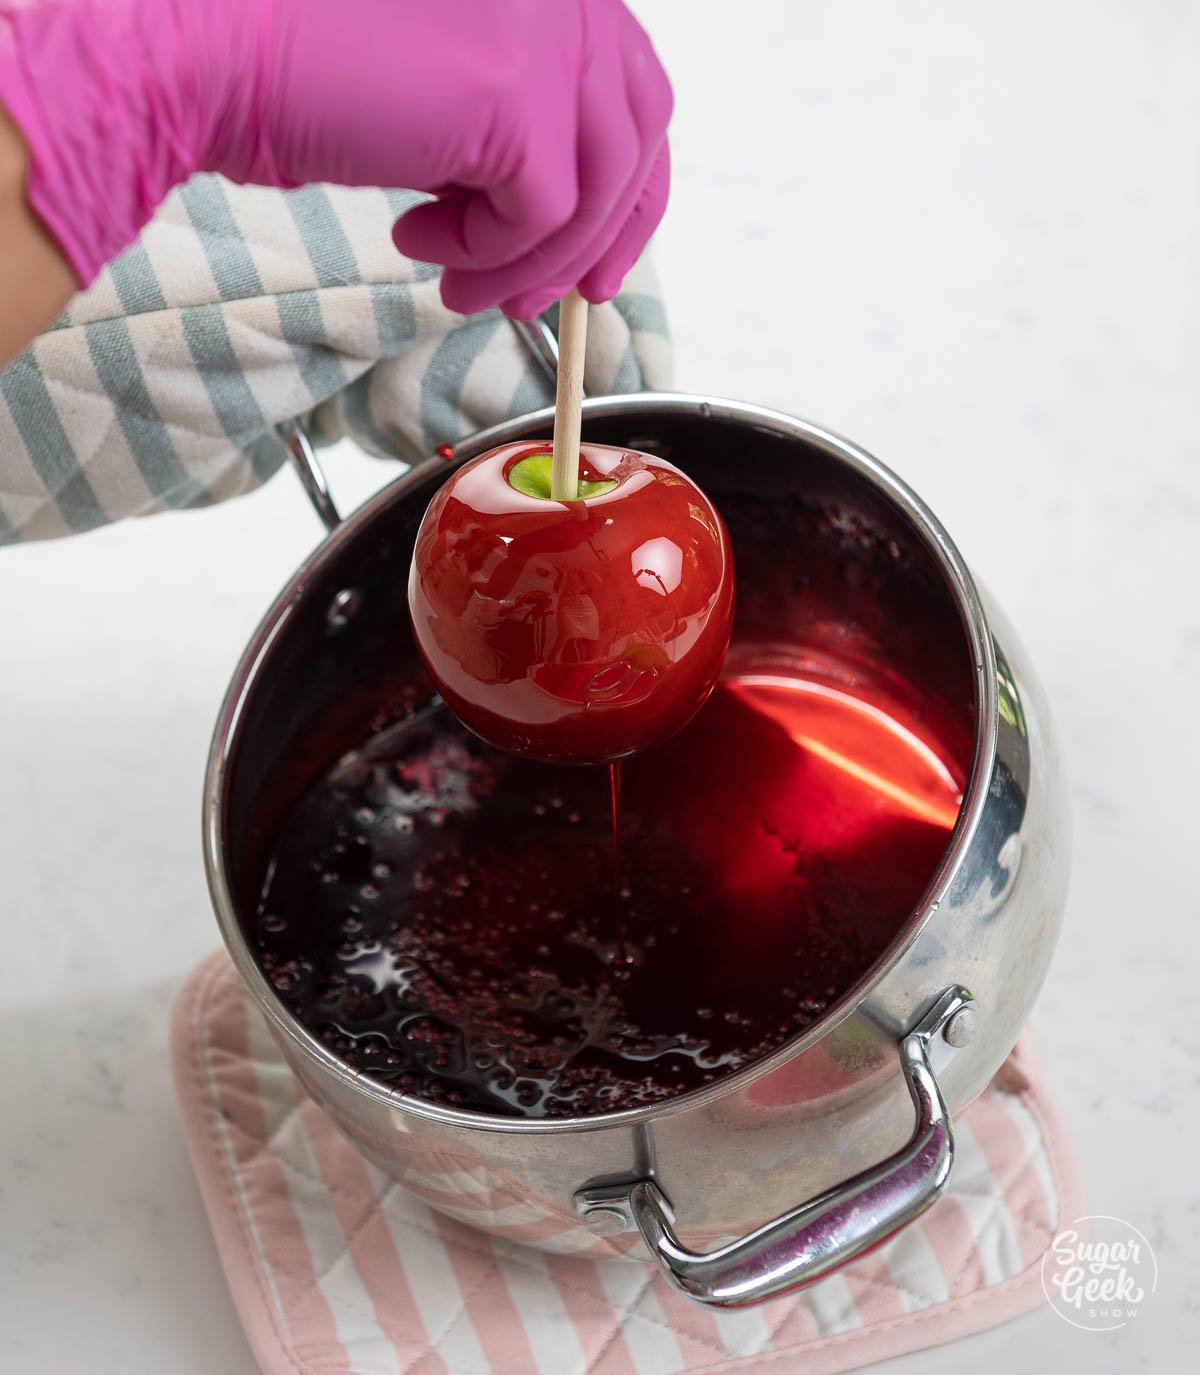 lifting a candy apple out of the candy mixture